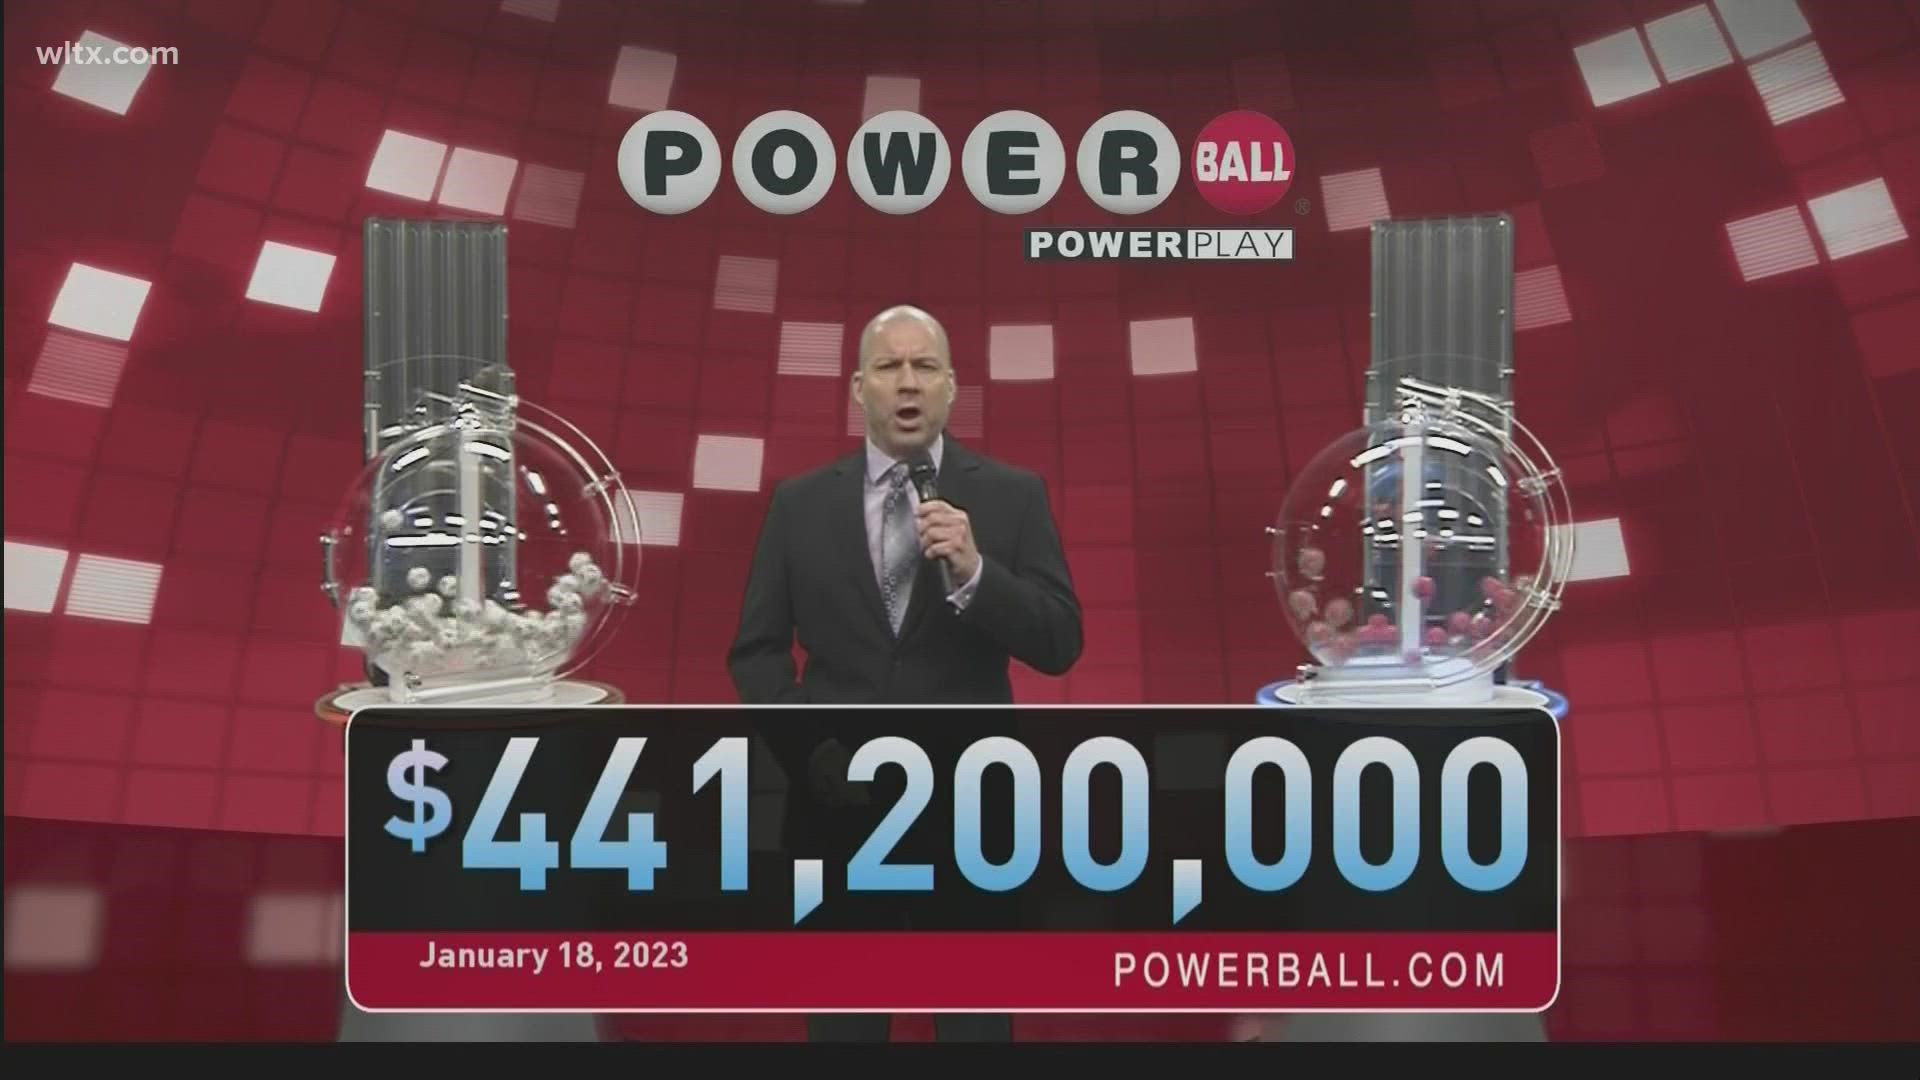 Here are the winning Powerball numbers for Wednesday, January 23, 2023.